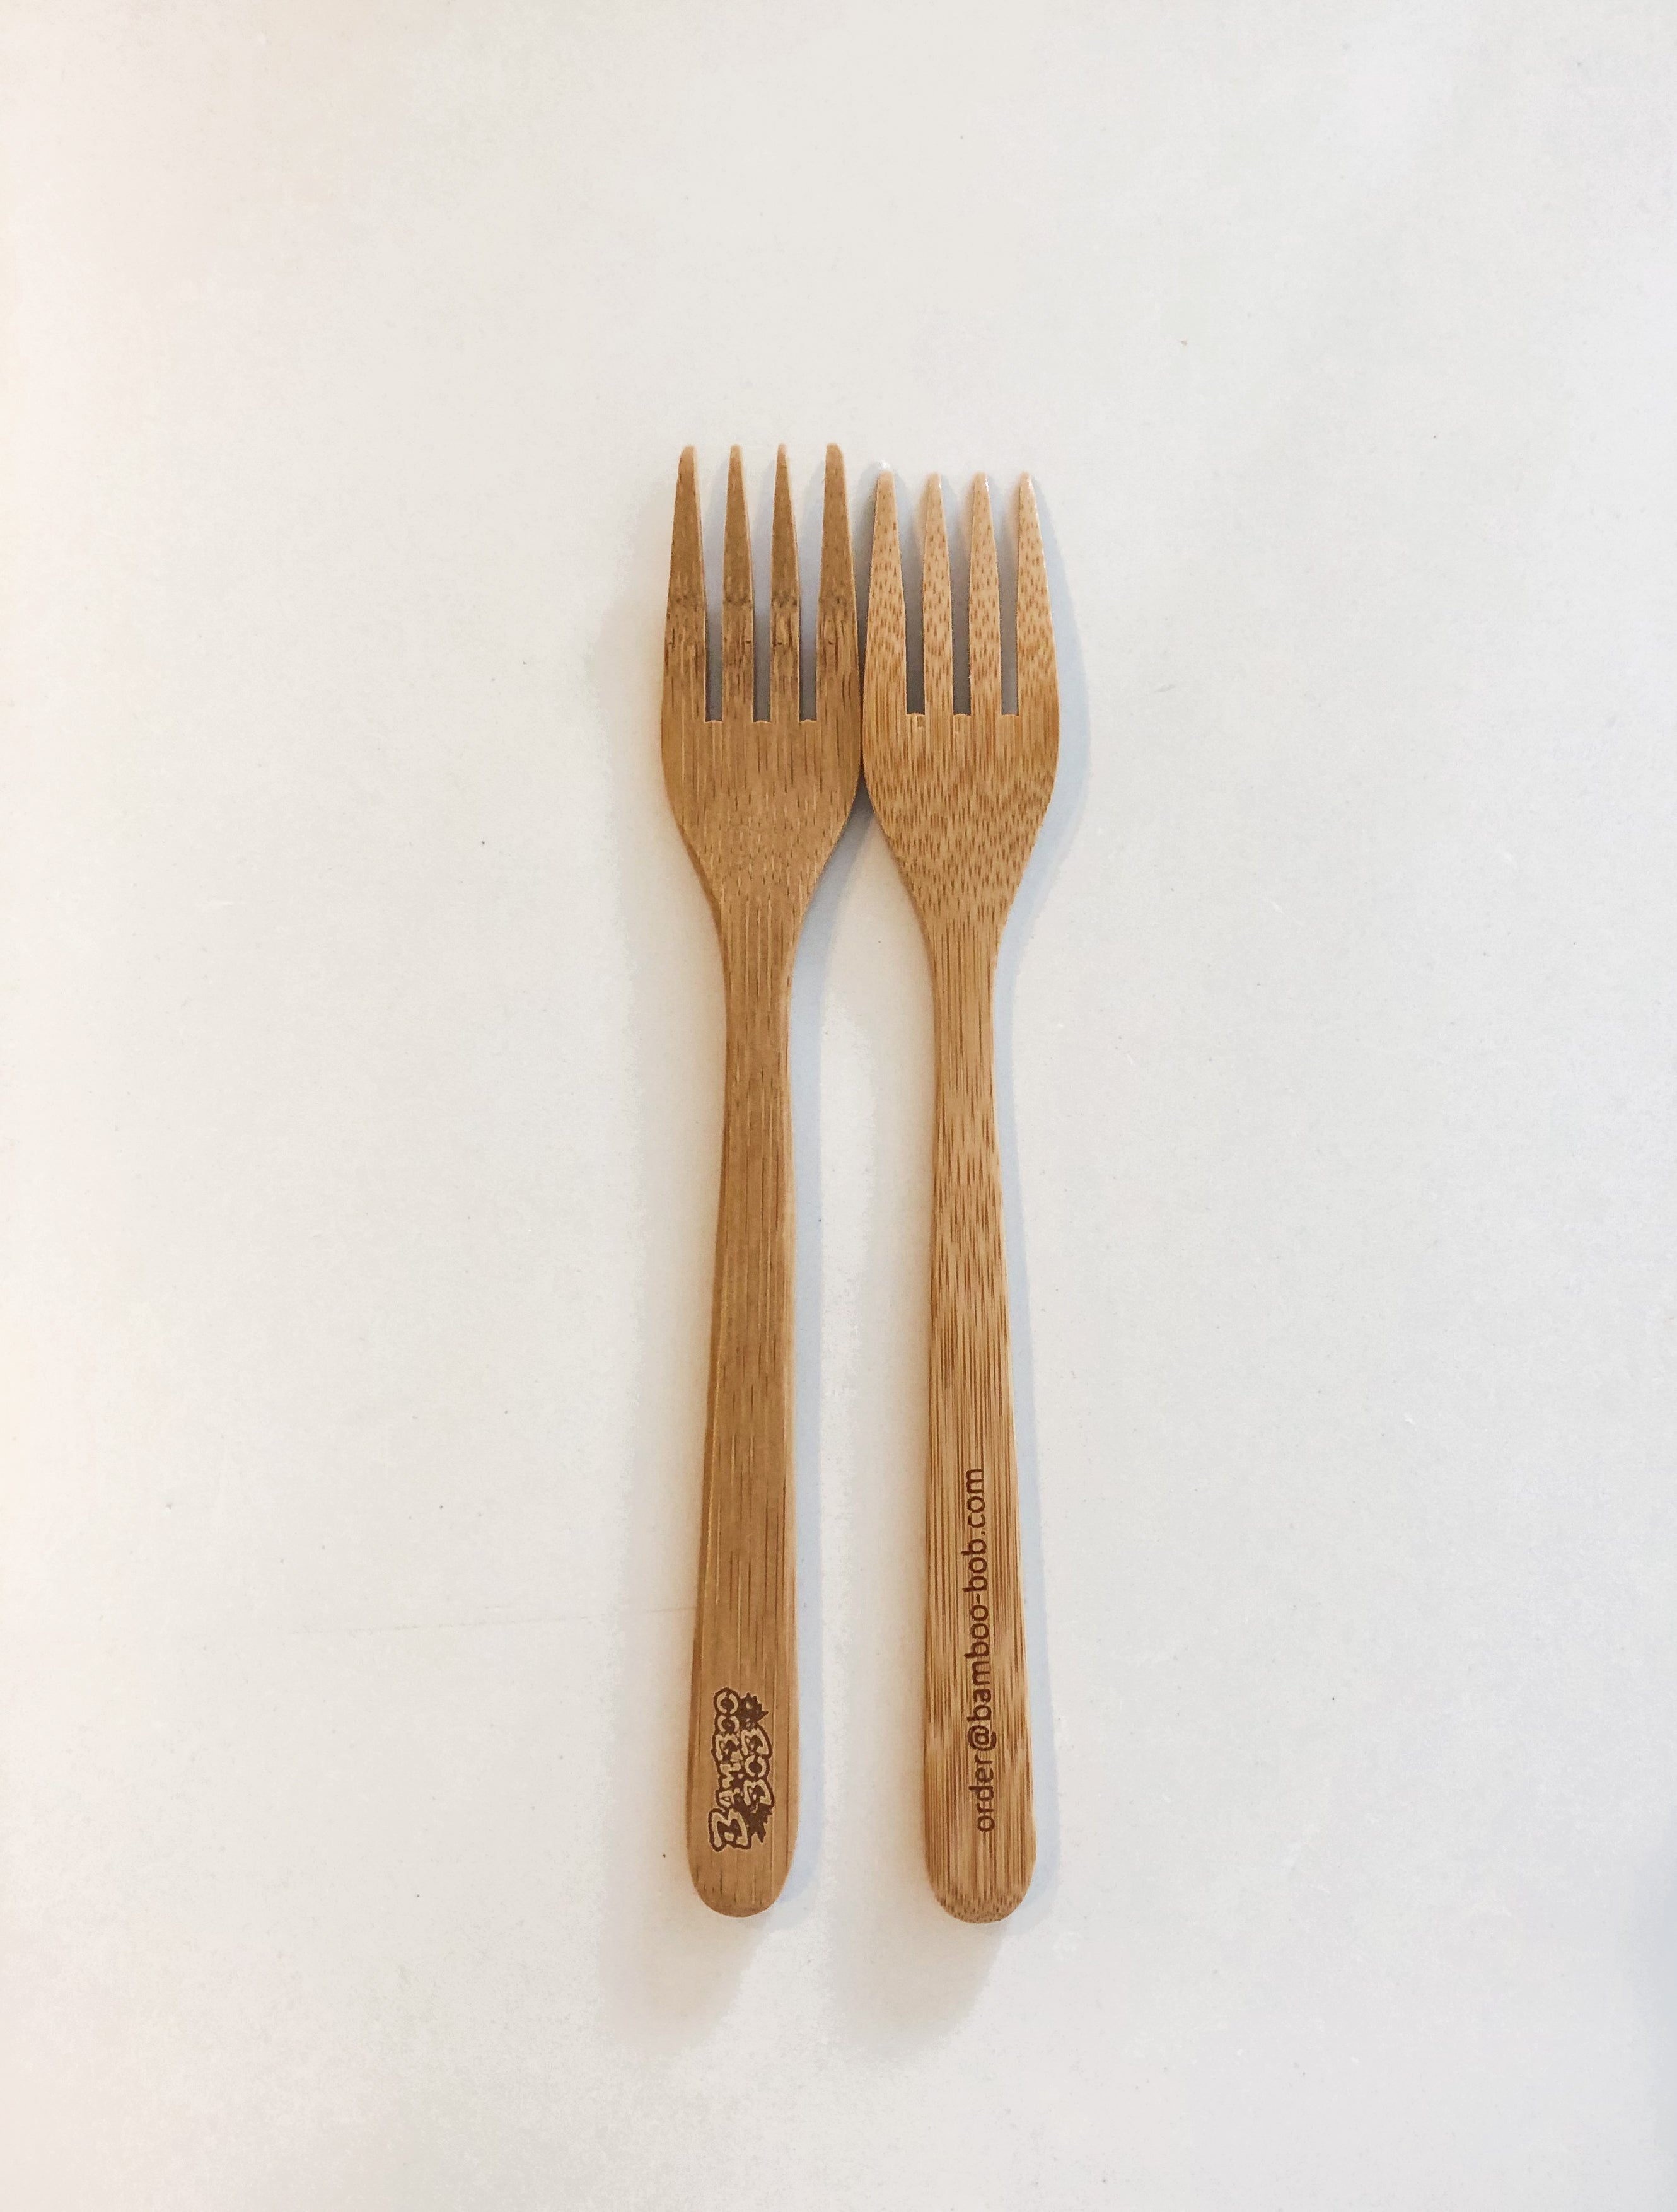 Bamboo "End the Plastic!" Eco Cutlery Kit